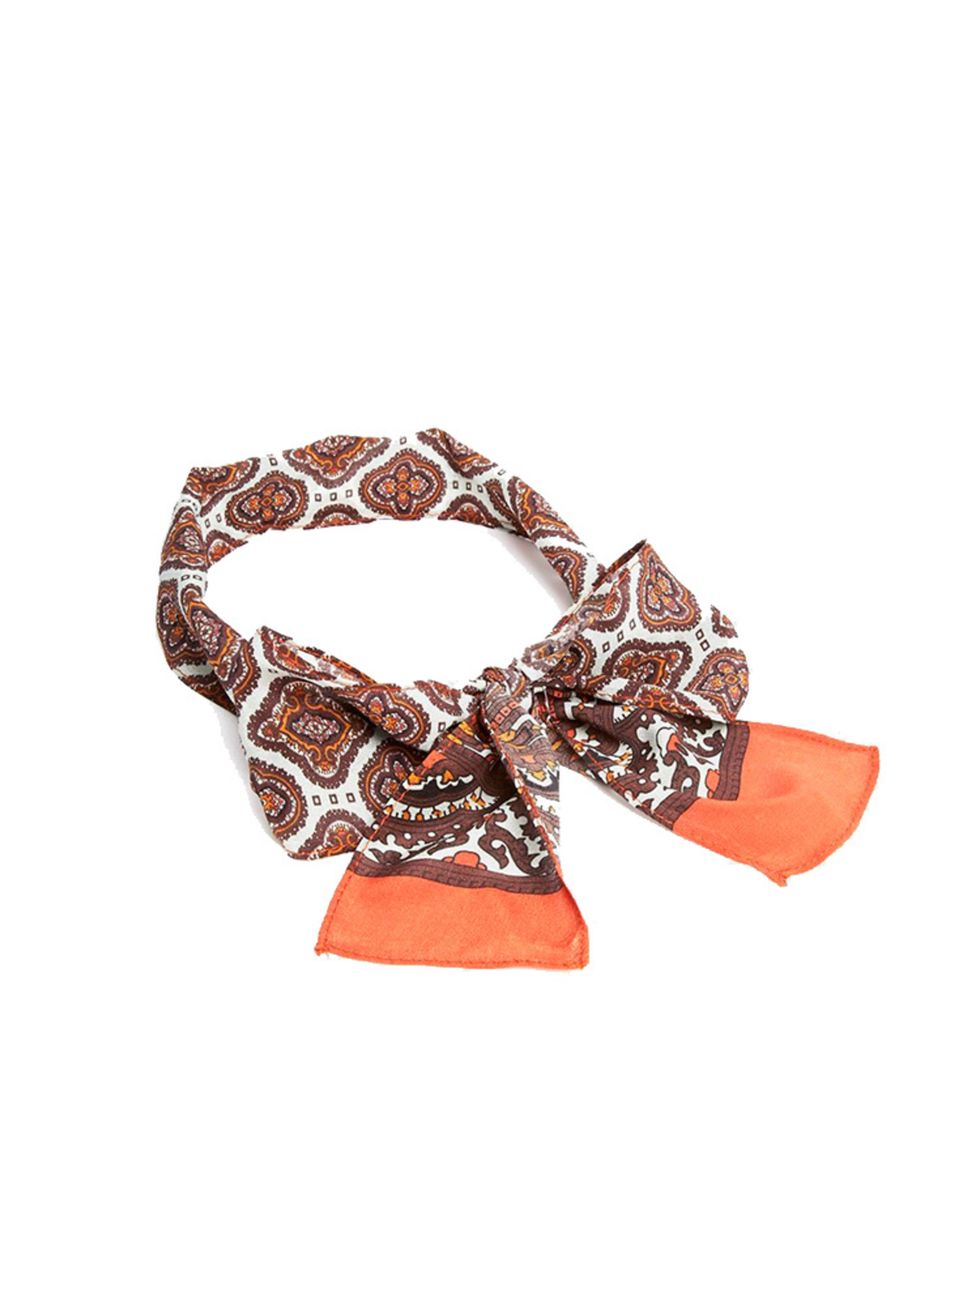 <p><a href="http://www.asos.com/asos/asos-silk-skinny-scarf-in-70s-paisley-print/prod/pgeproduct.aspx?iid=5079052&clr=Multi&searchterm=skinny+scarf+&pgesize=25&pge=1&totalstyles=61&gridsize=3&gridrow=1&gridcolumn=1#1wsLAMljBtLW1Hiv.97" target="_blank">Aso